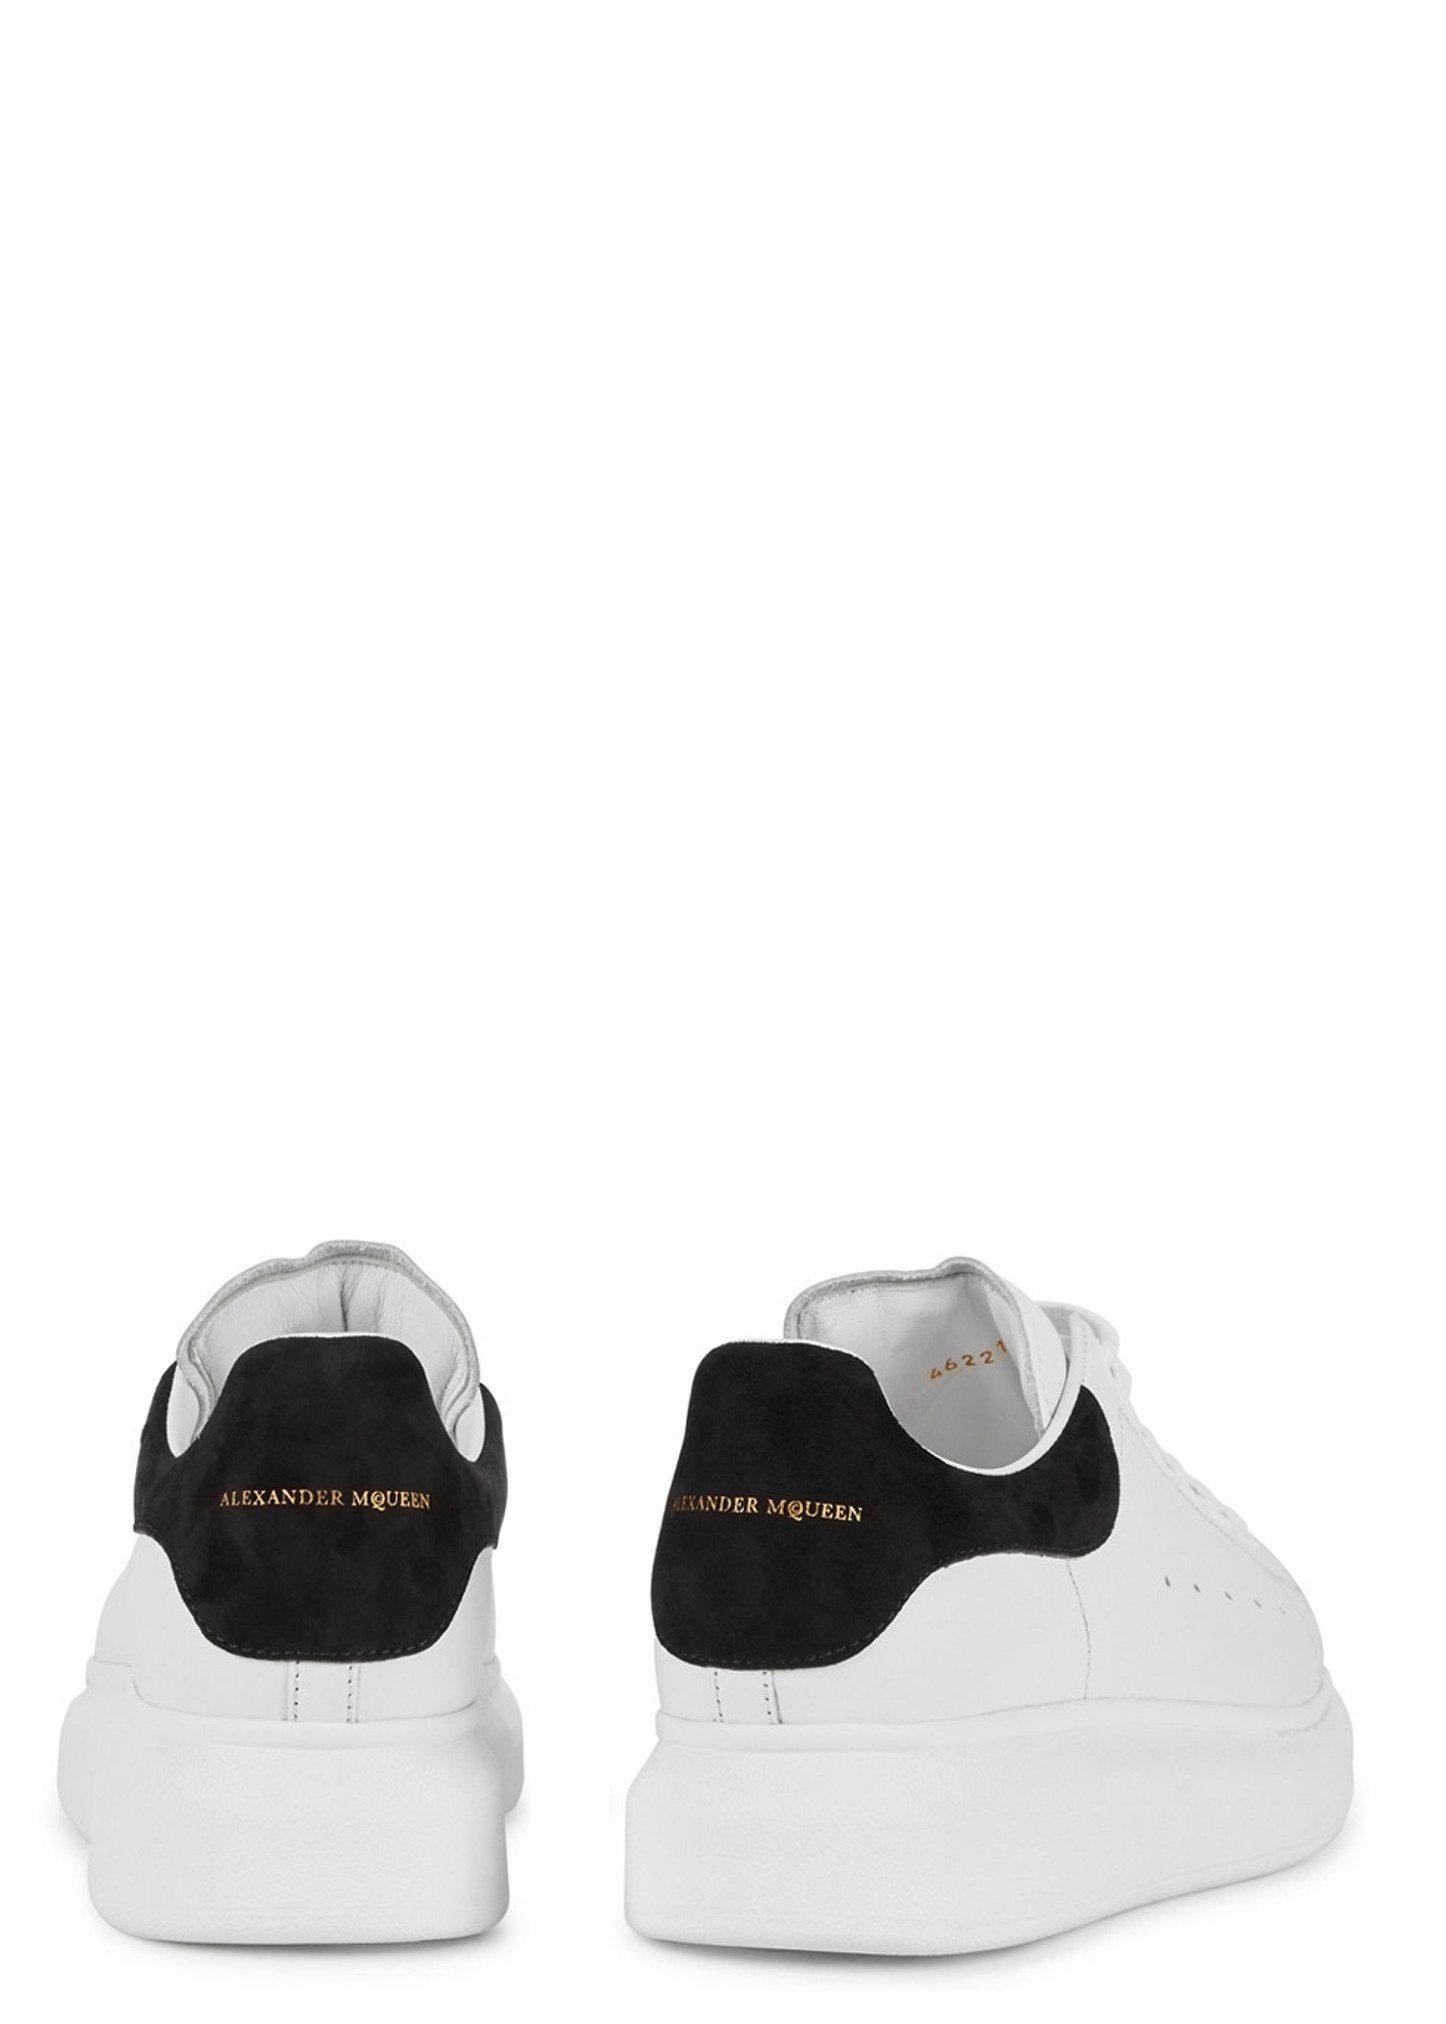 Alexander McQueen Oversized white leather sneakers | REVERSIBLE